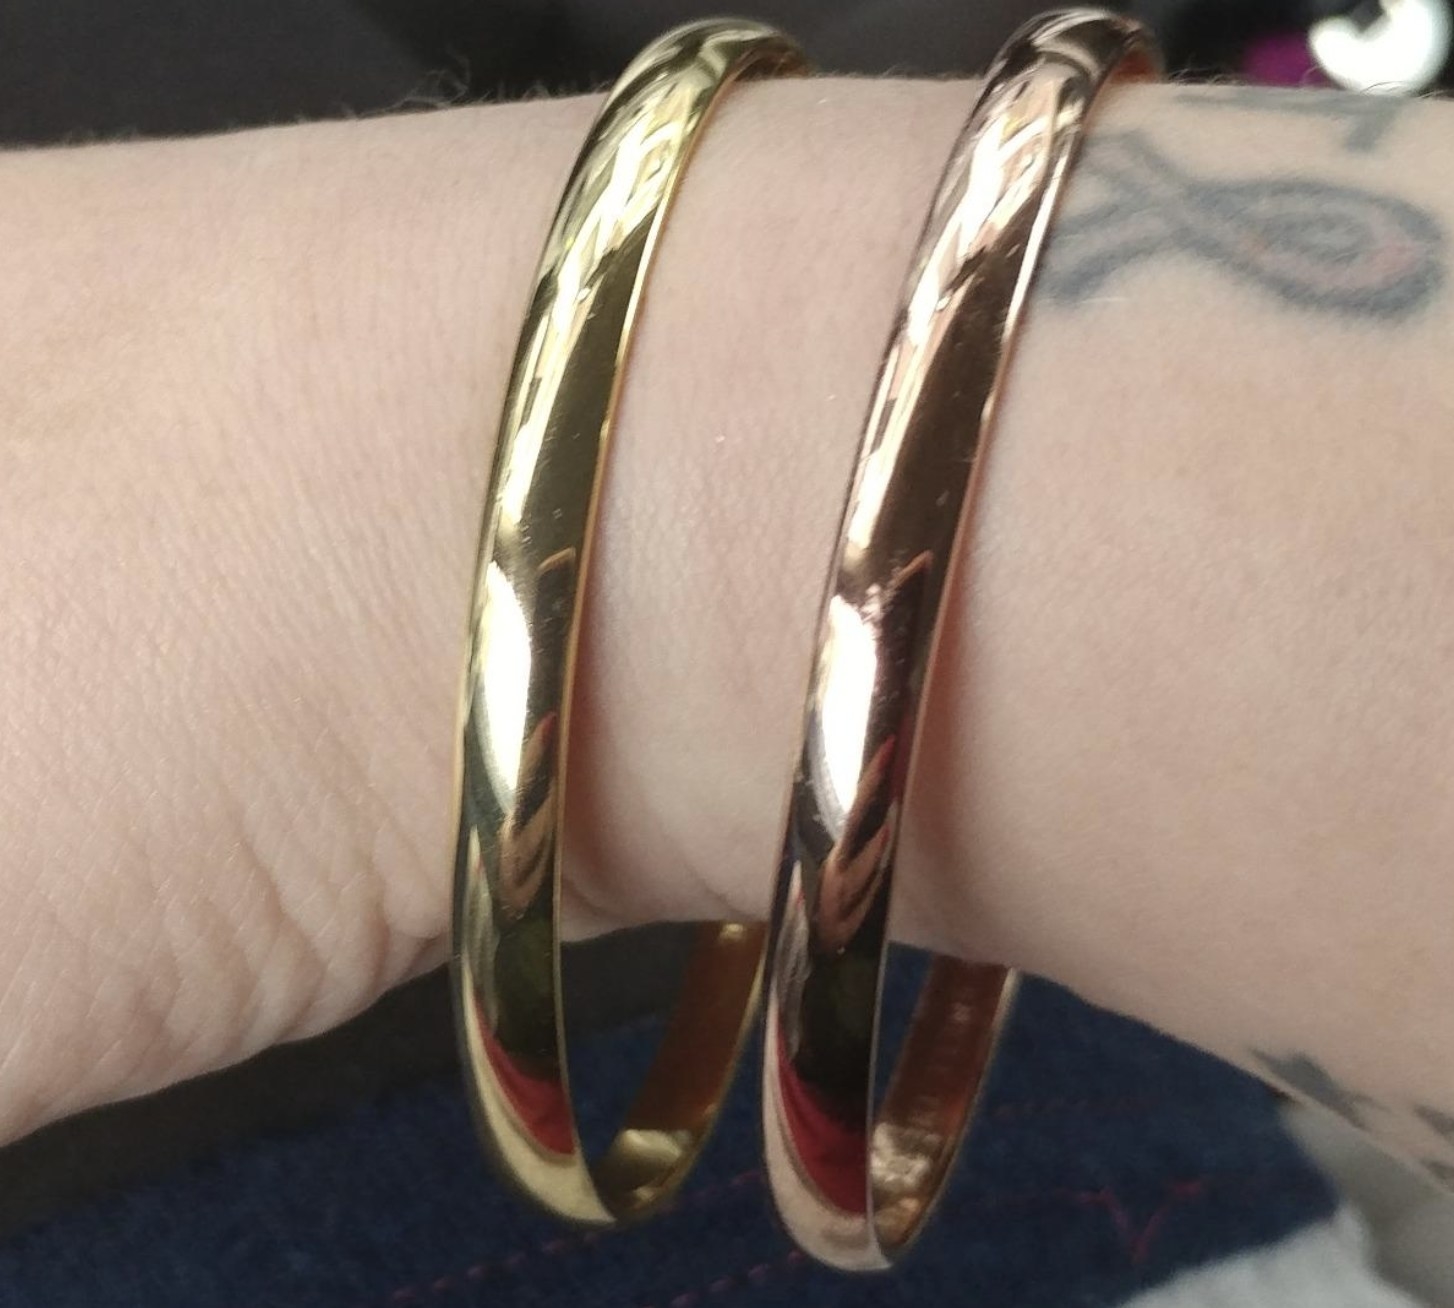 reviewer wearing the two Kate Spade bangles